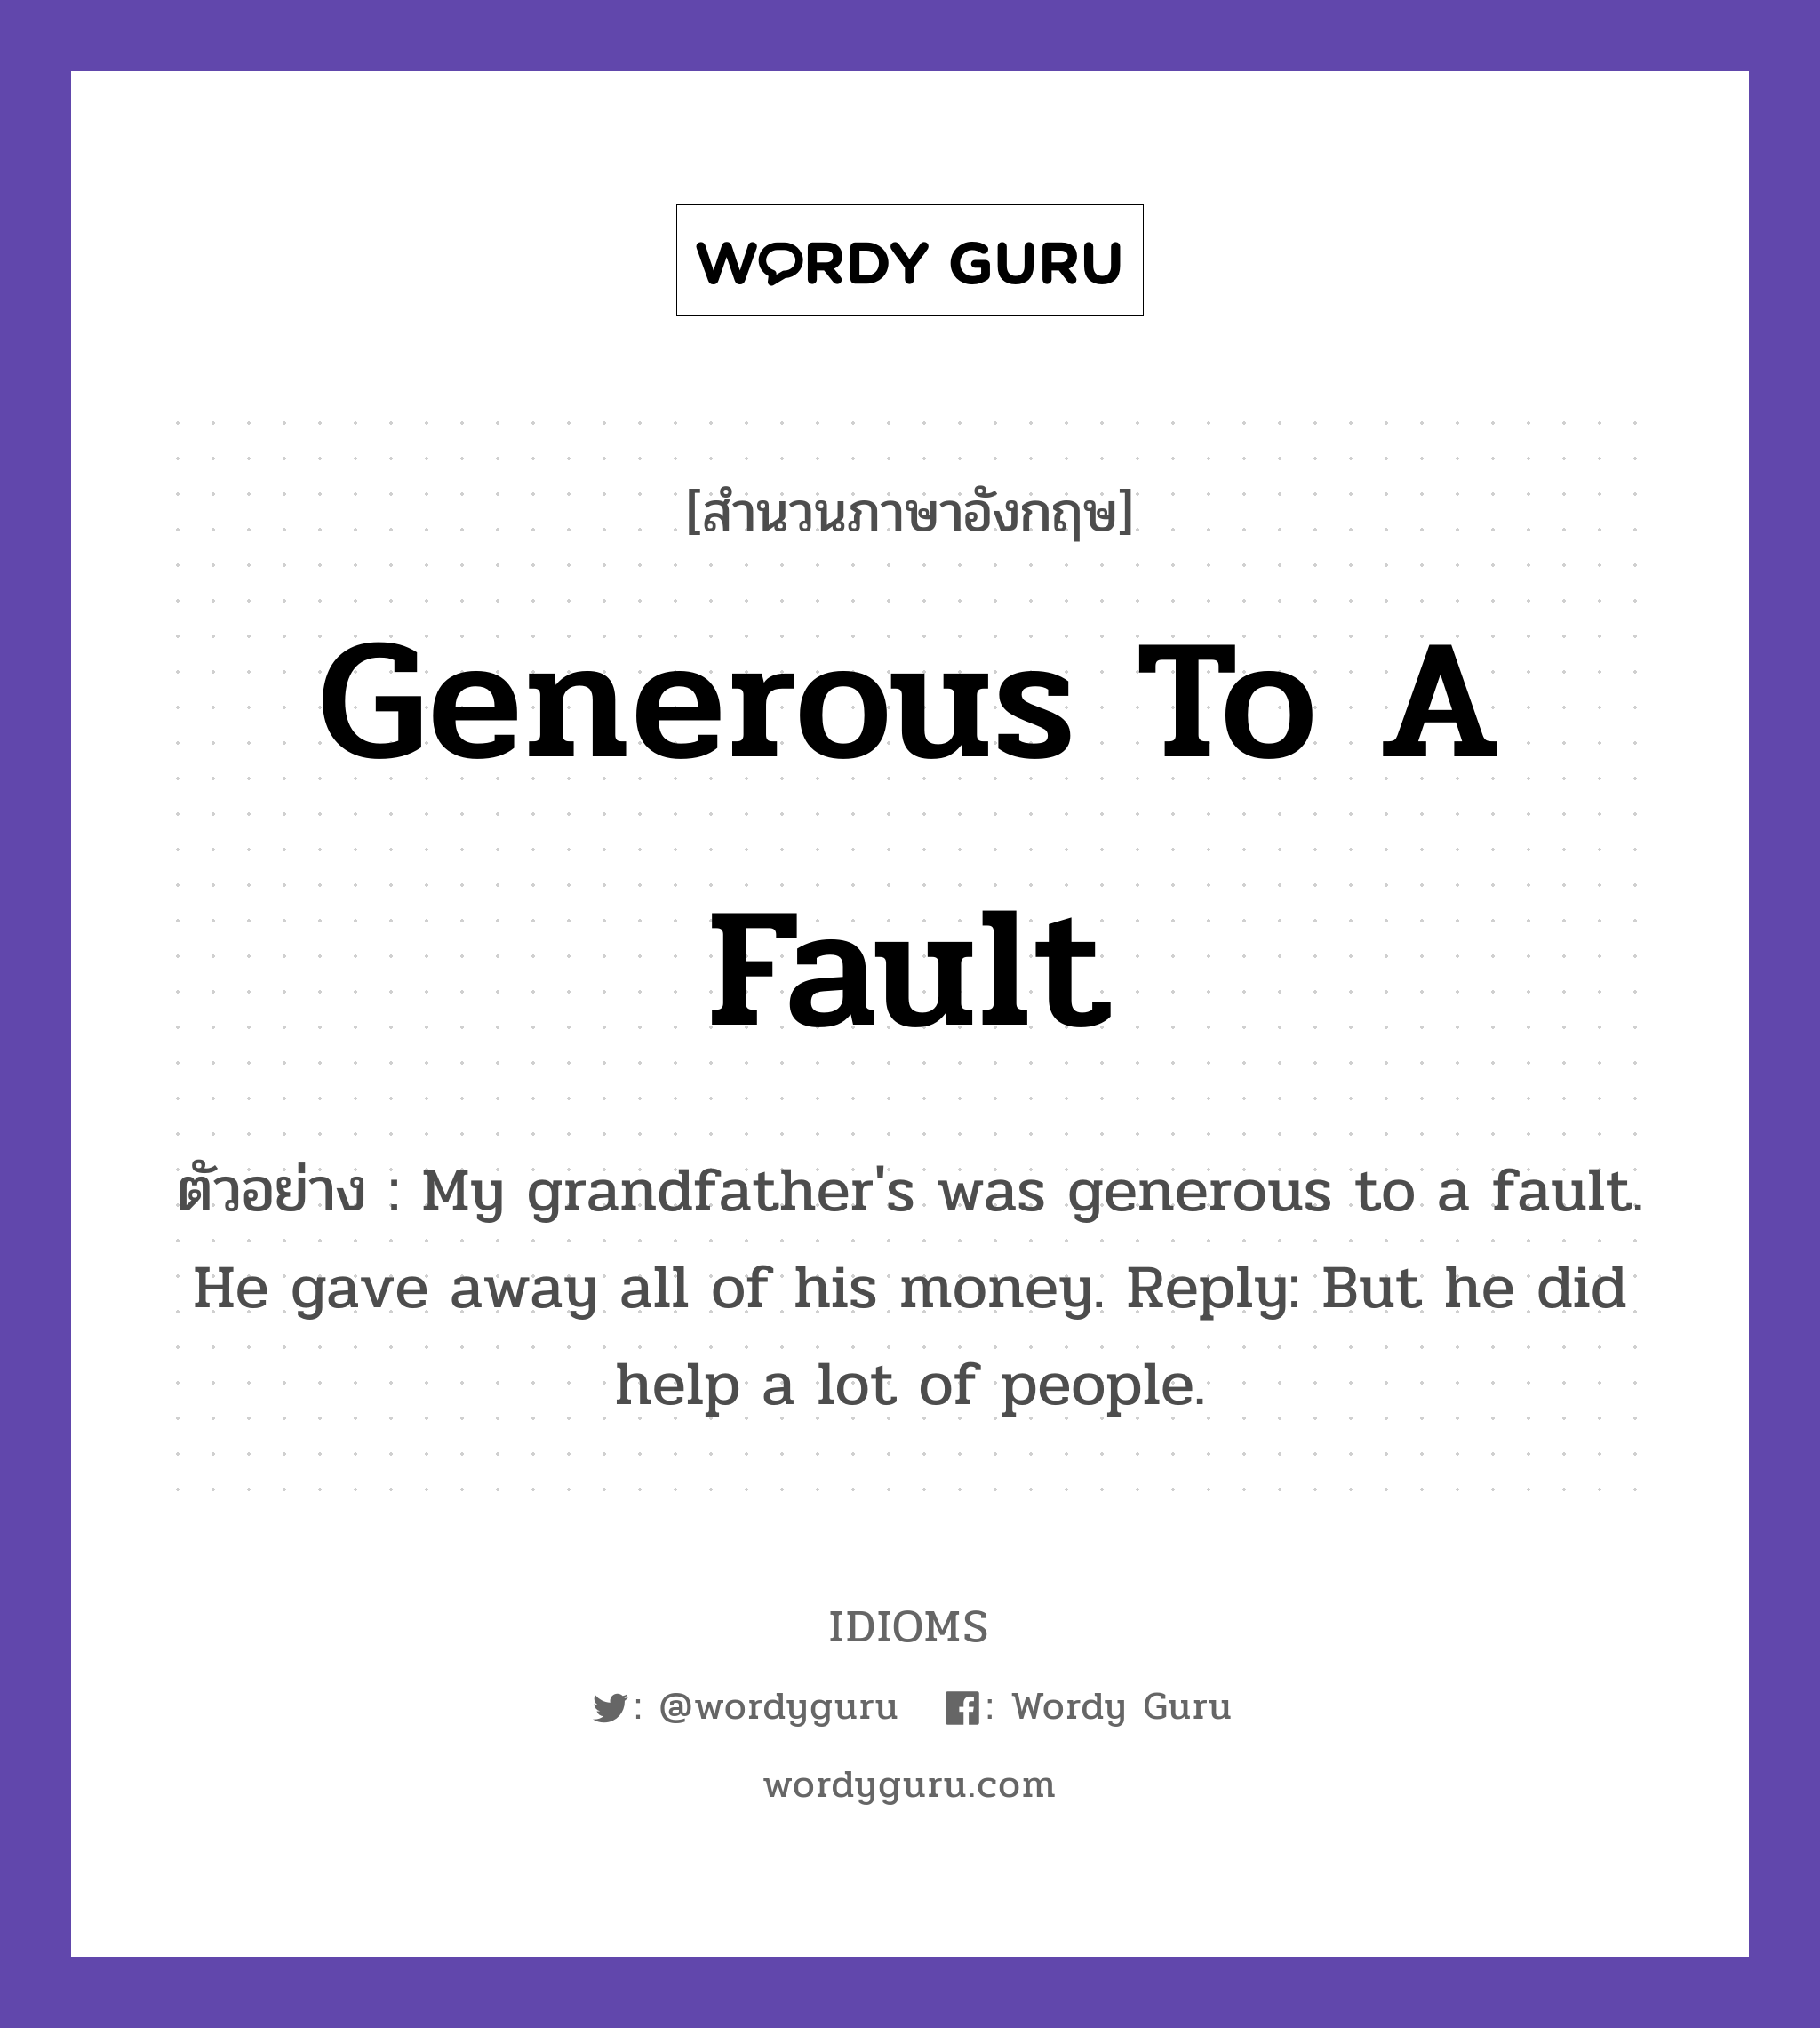 Generous To A Fault แปลว่า?, สำนวนภาษาอังกฤษ Generous To A Fault ตัวอย่าง My grandfather's was generous to a fault. He gave away all of his money. Reply: But he did help a lot of people.